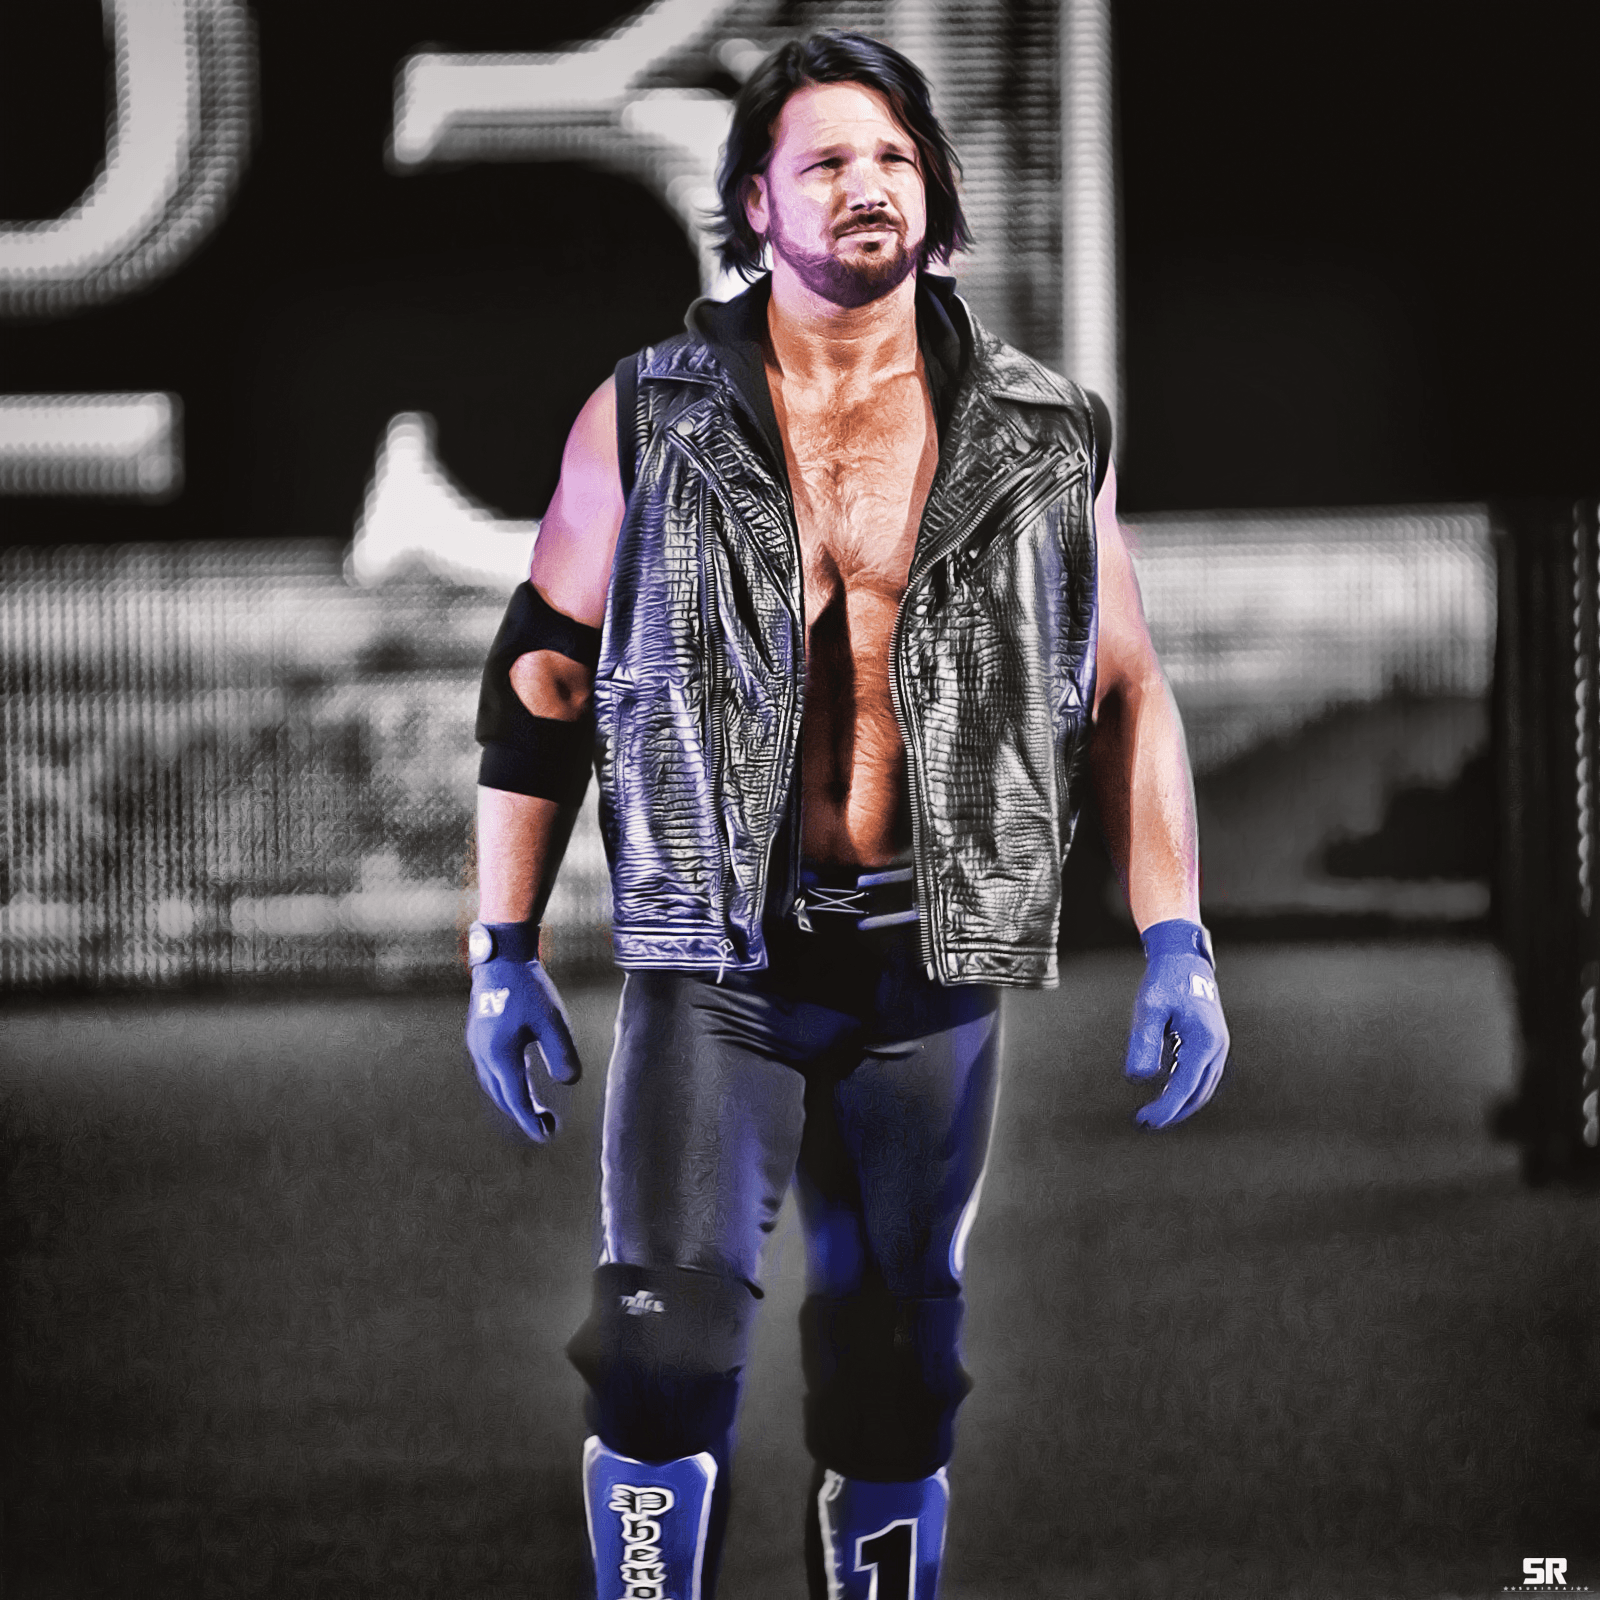 WWE  Styles HD Wallpapers - Wallpaper Cave